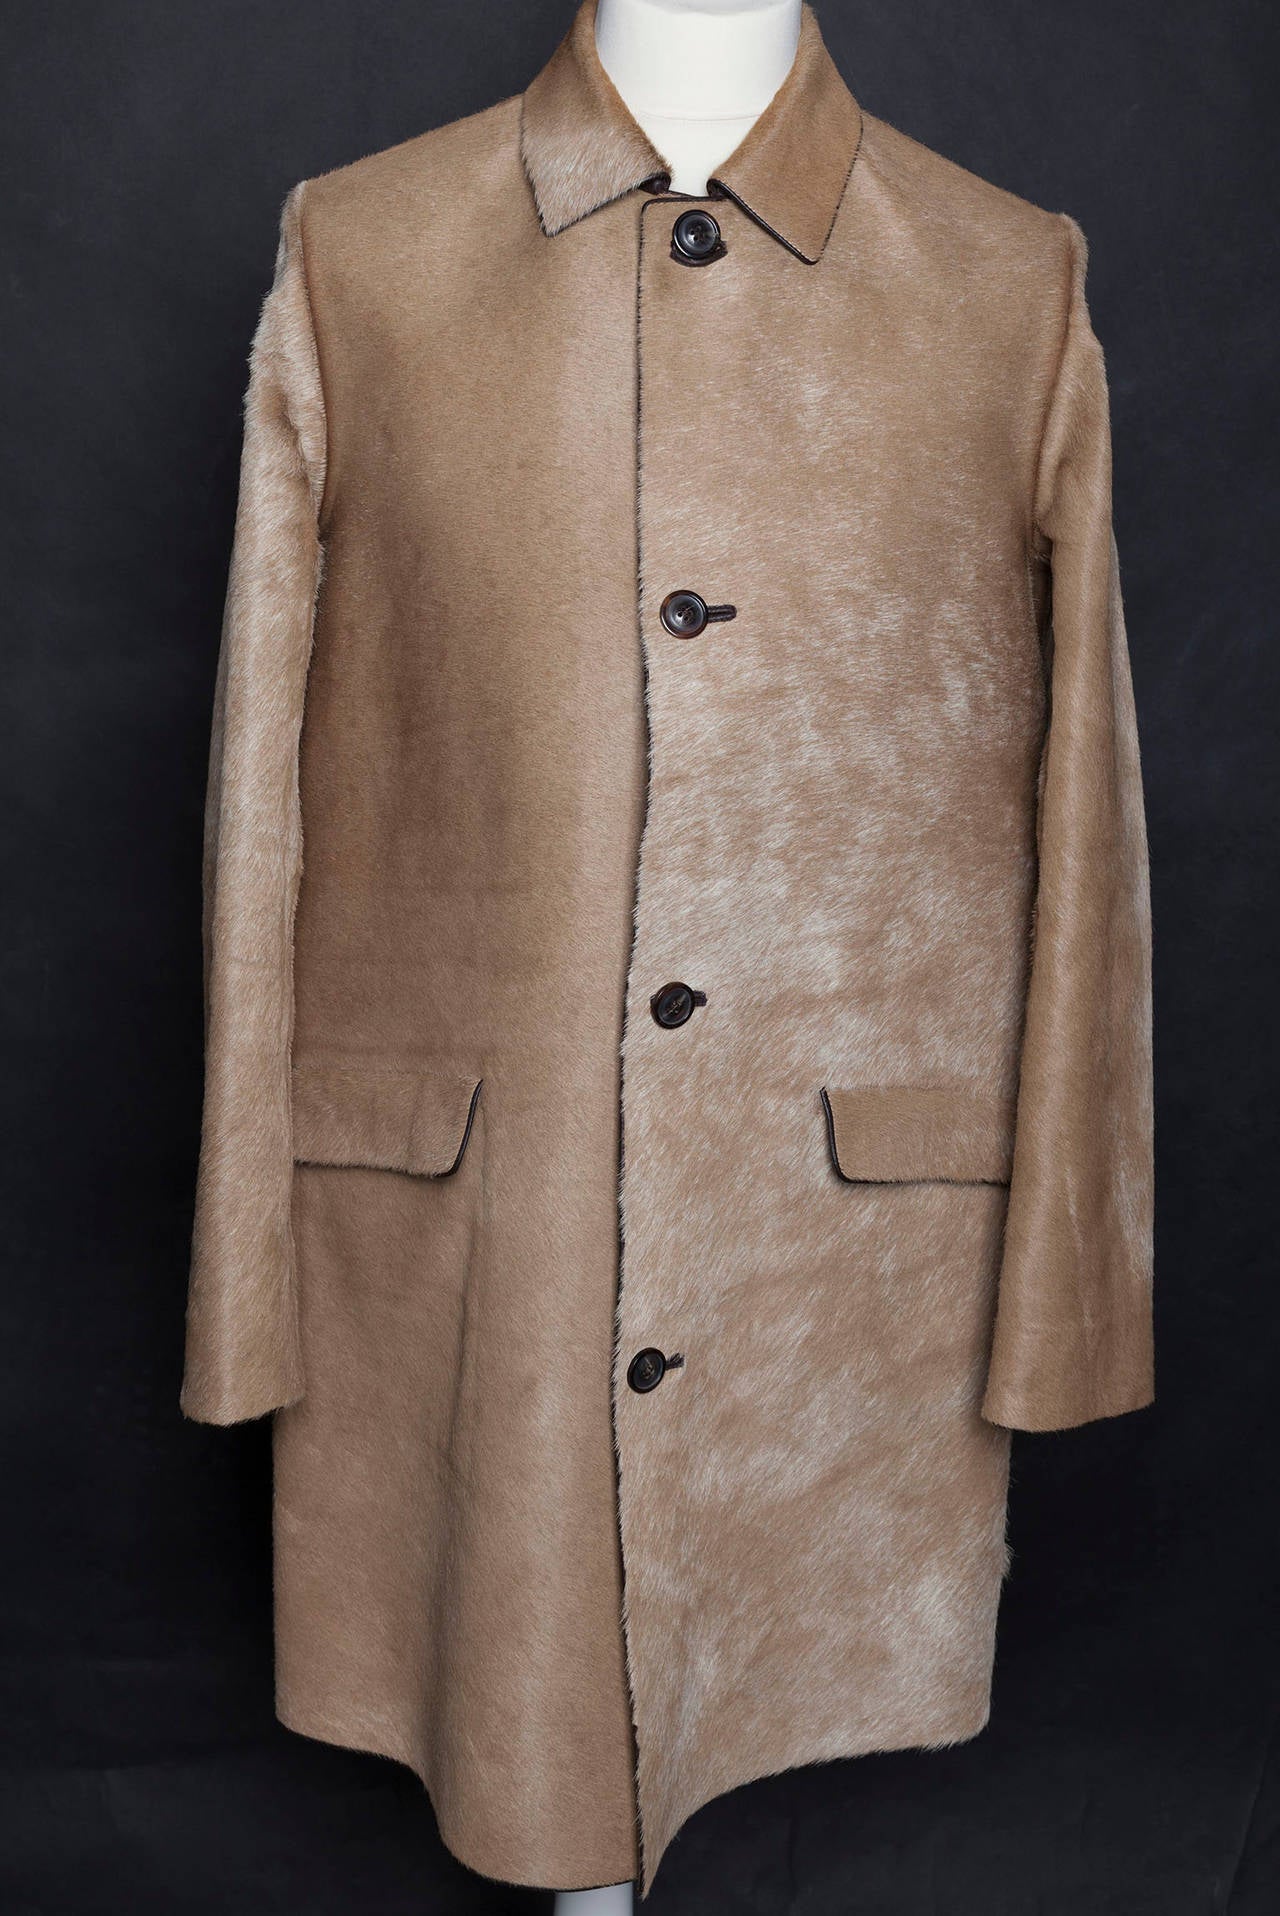 Maison Martin Margiela Mens (14) 'Replica Series 07' Ponyskin Trench Coat. Heavy ponyskin coat in a tan and cream colour way with chocolate brown leather trim and lining. Simply cut with a slight a-line silhouette and finished with polished horn